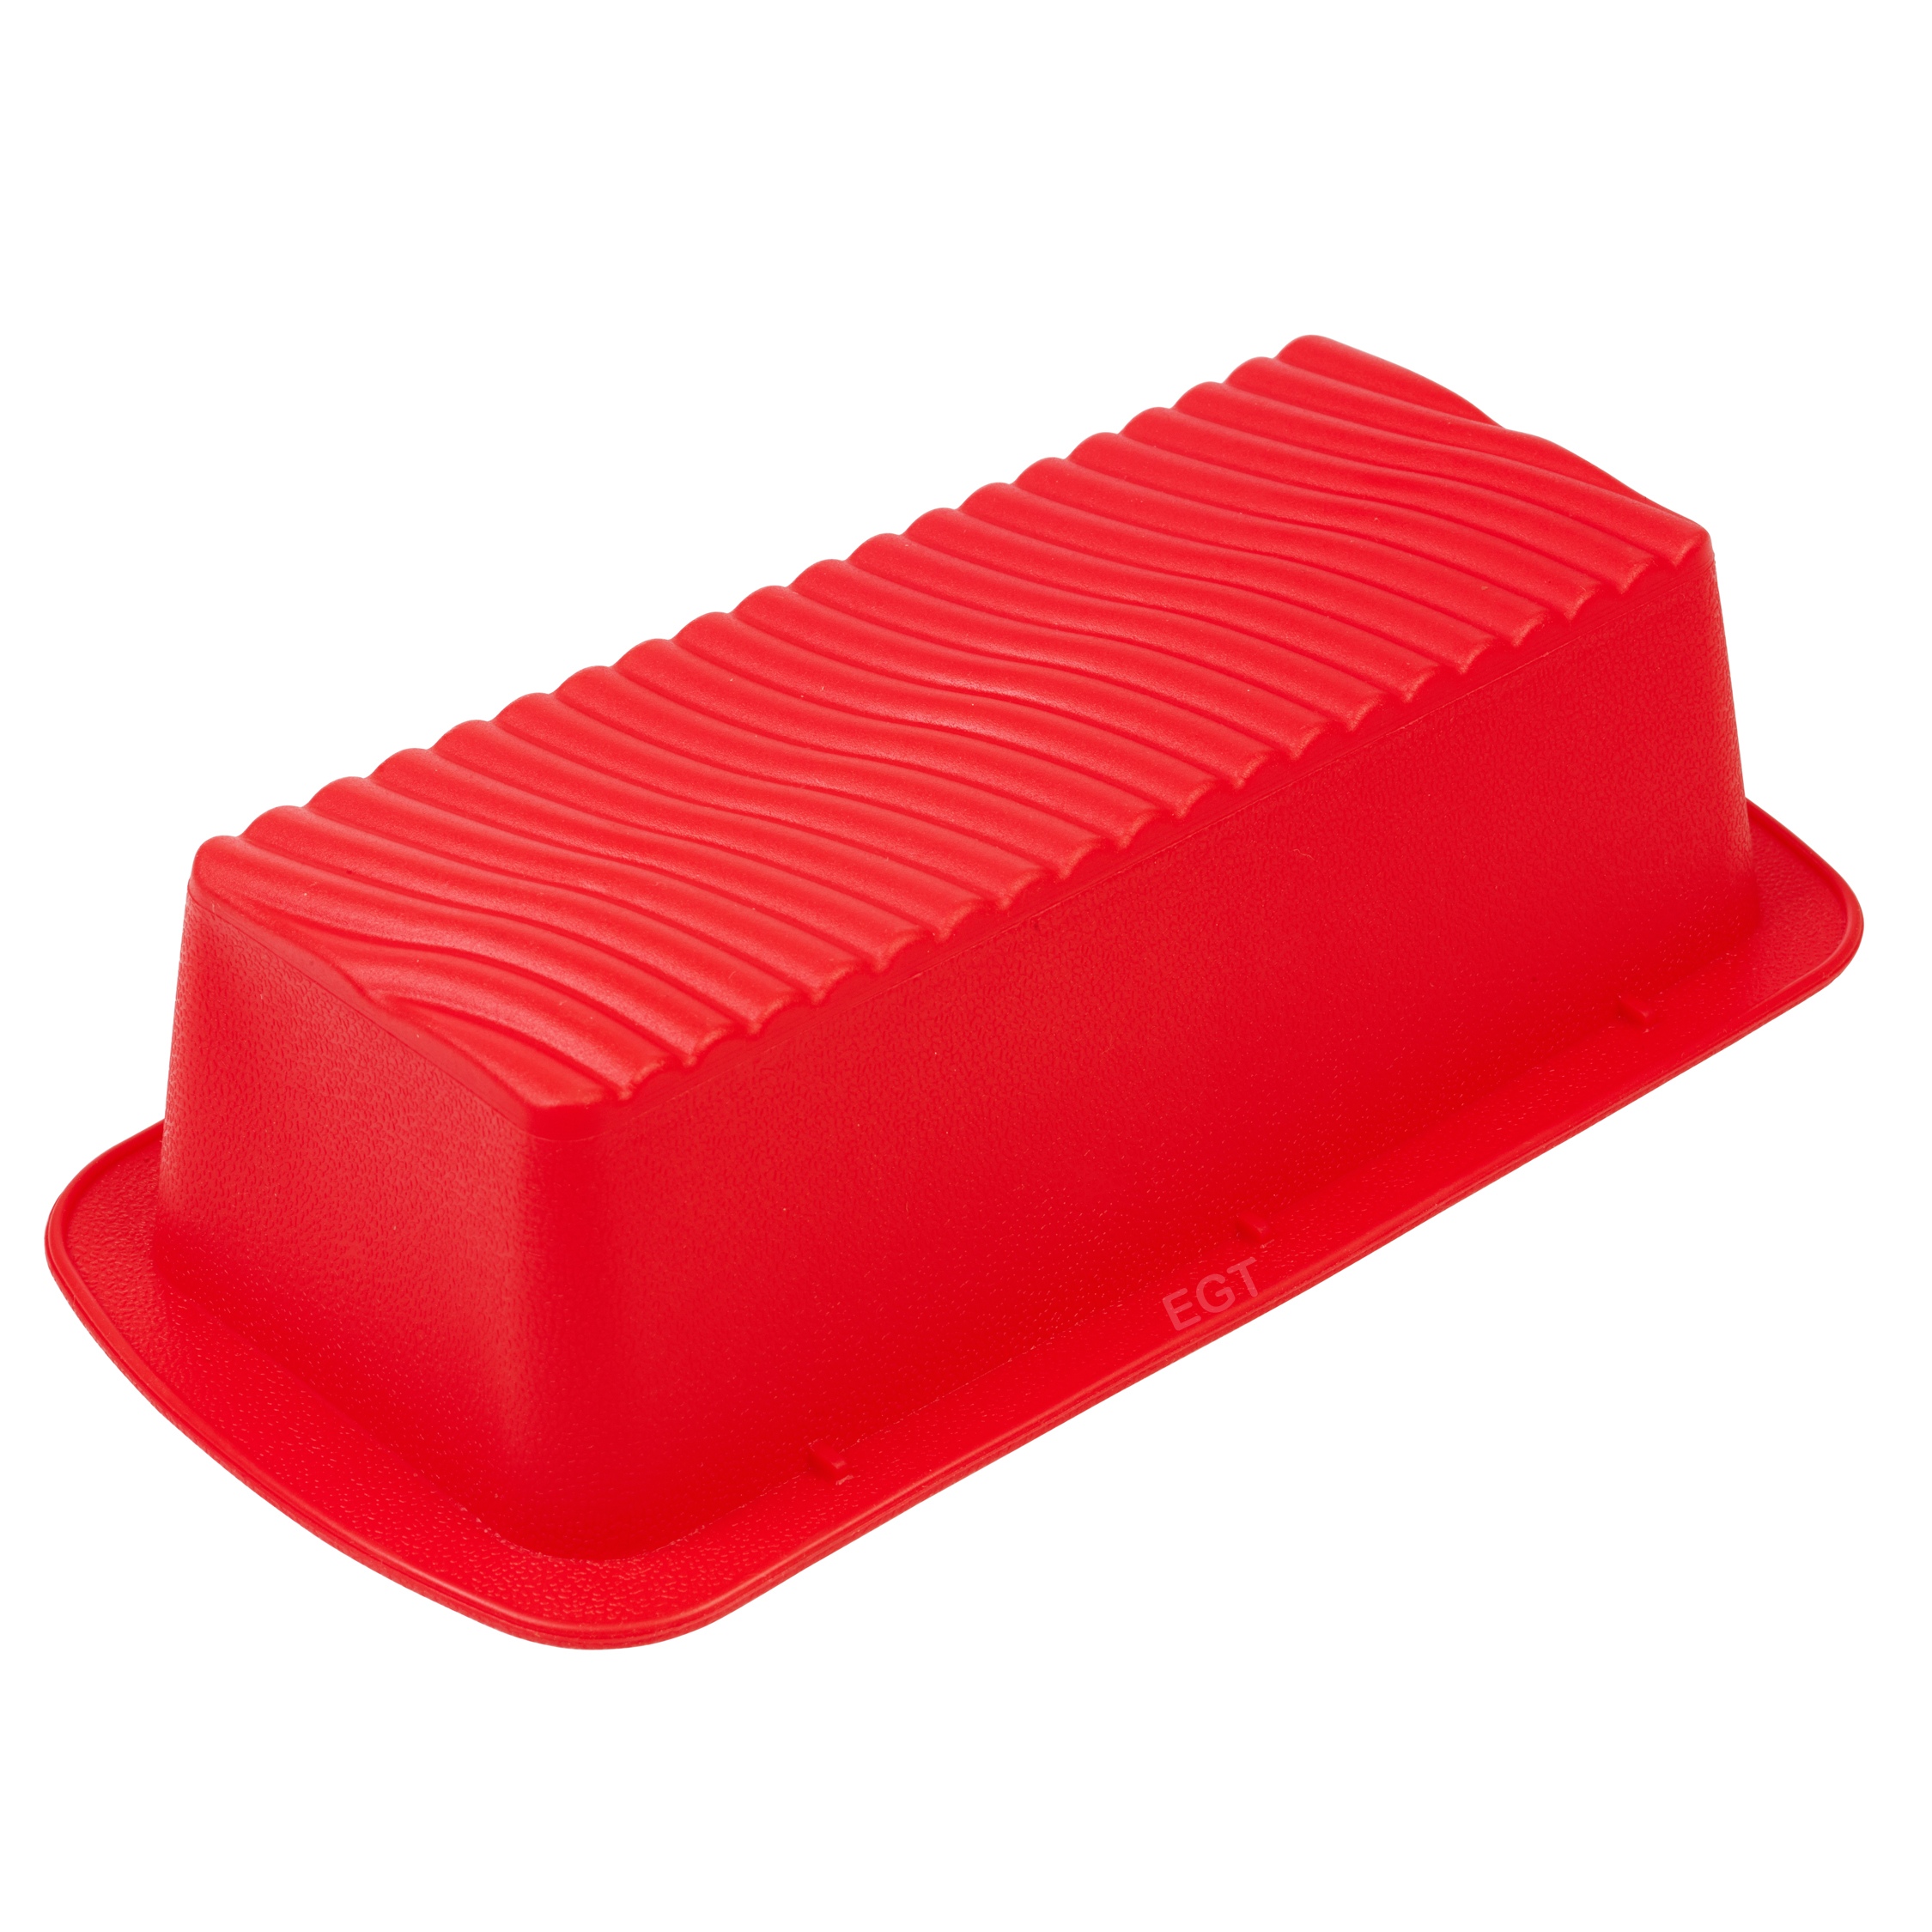 Silicone Bakeware Loaf 37